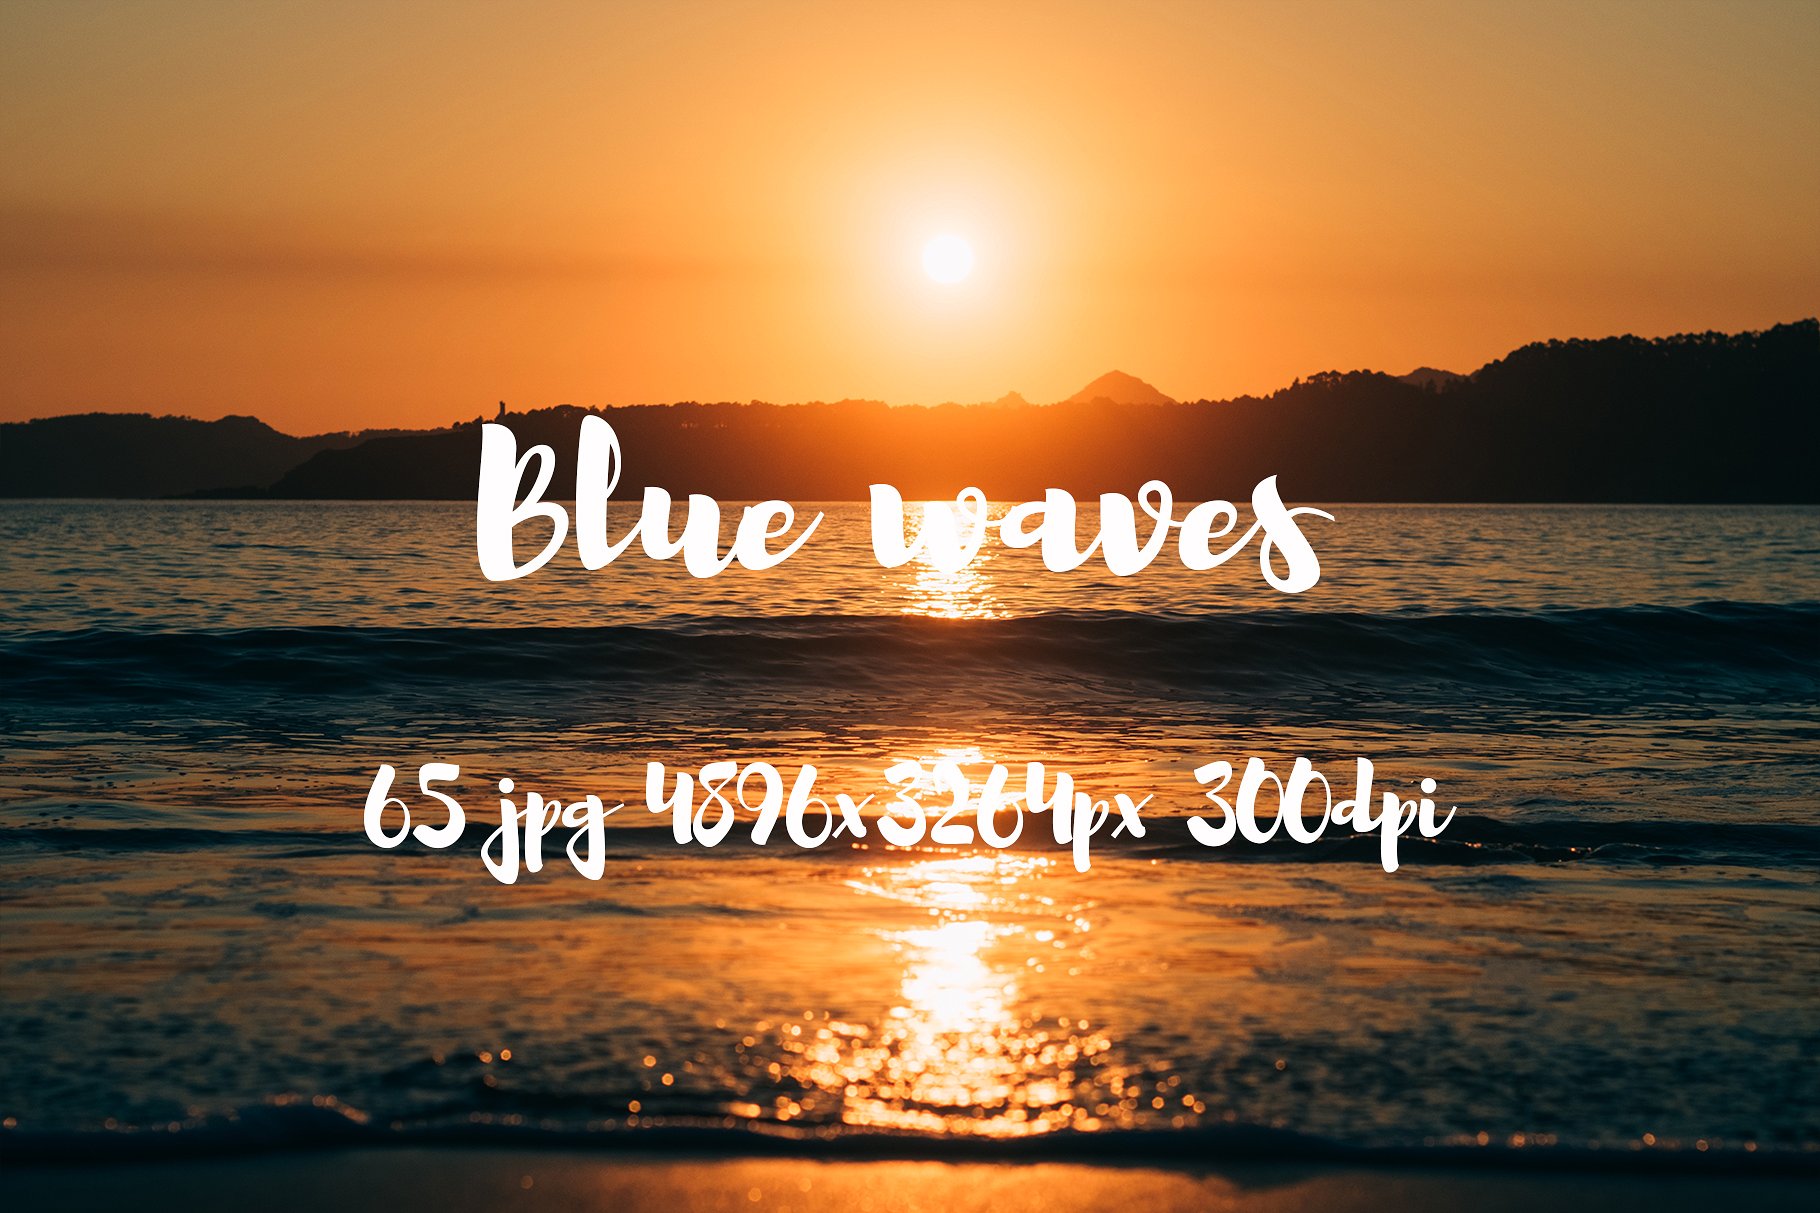 Blue waves photo pack